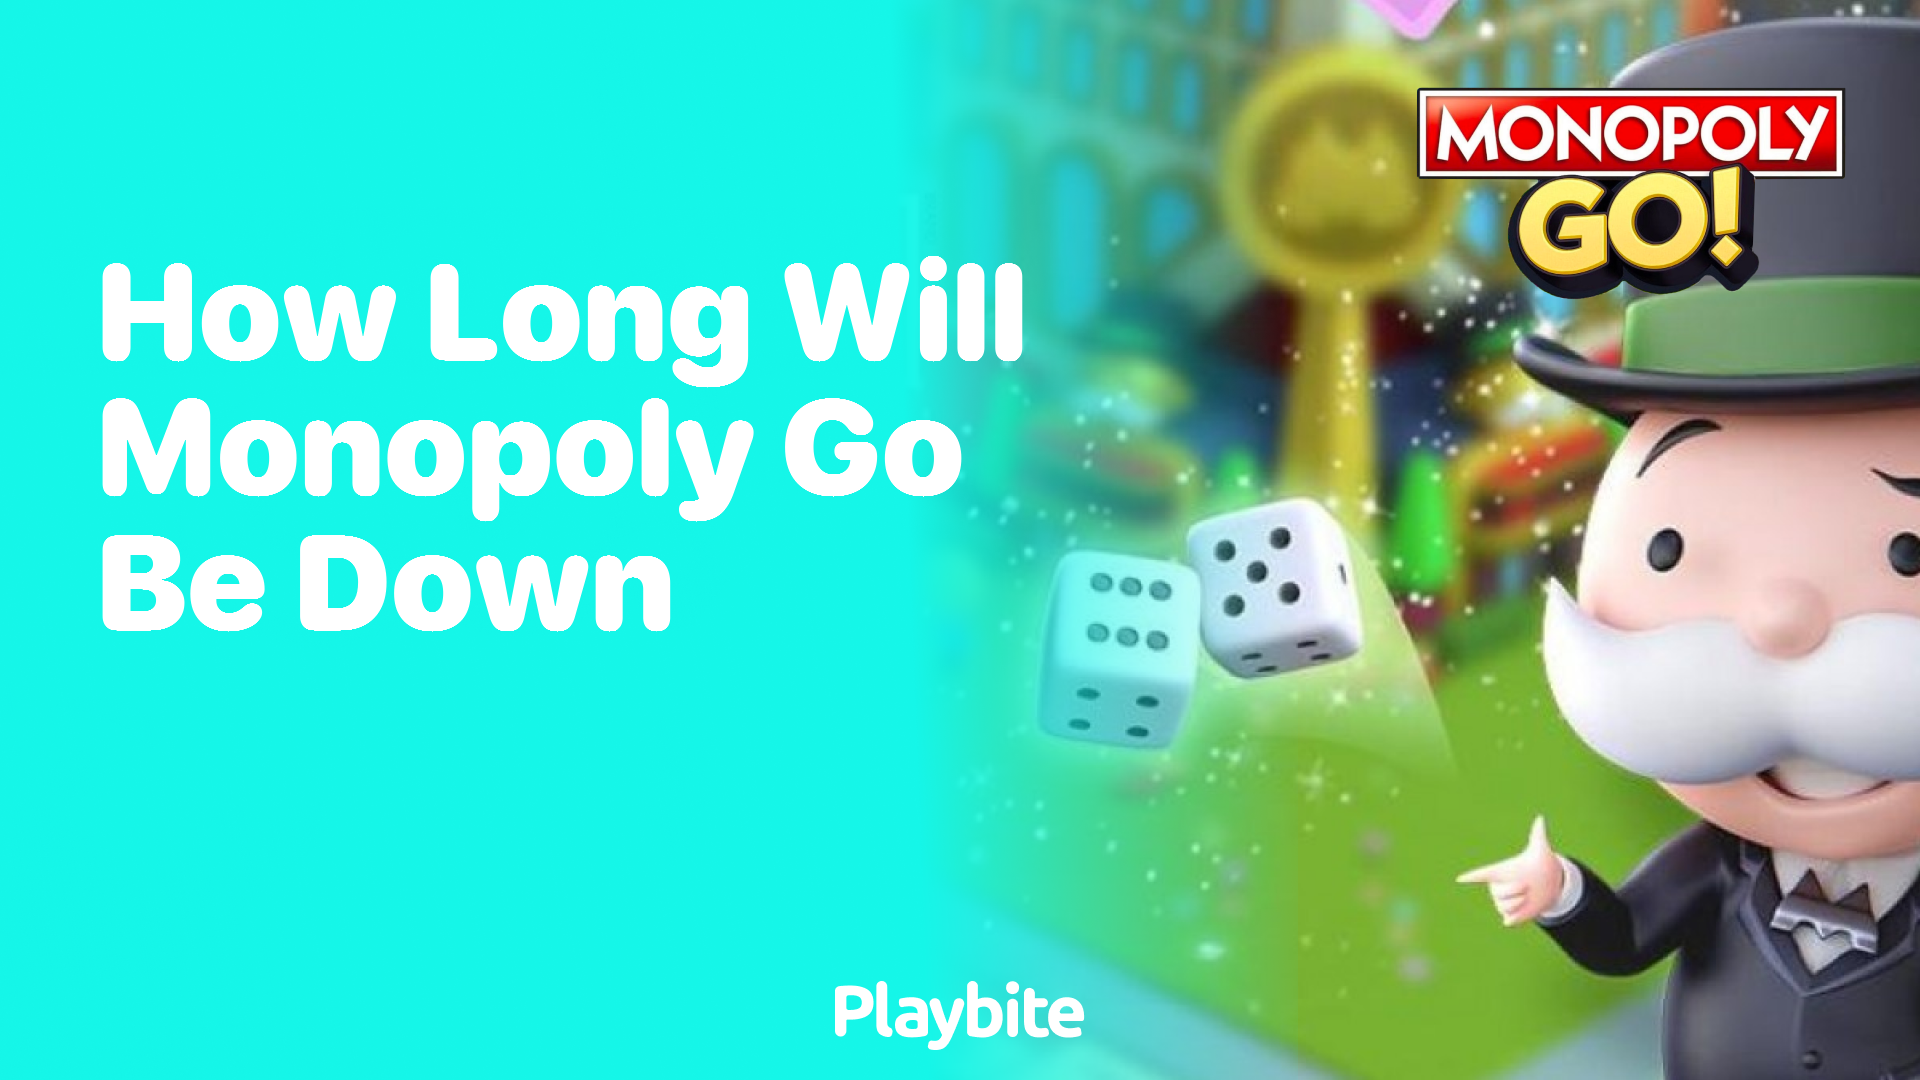 How Long Will Monopoly Go Be Down?